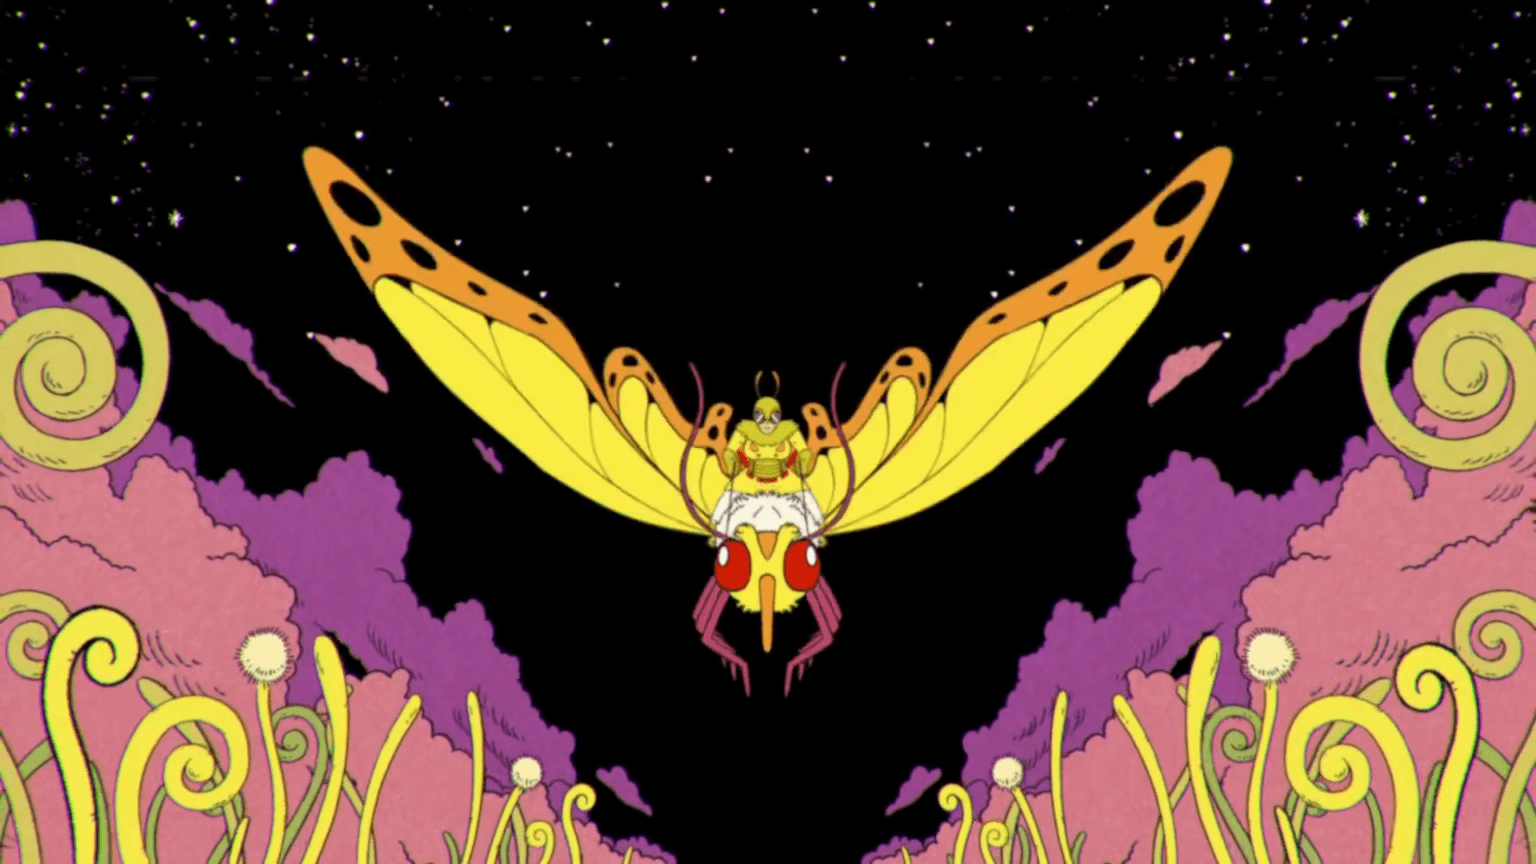 King Gizzard & The Lizard Wizard Collabs with Marvelous Visual Artists